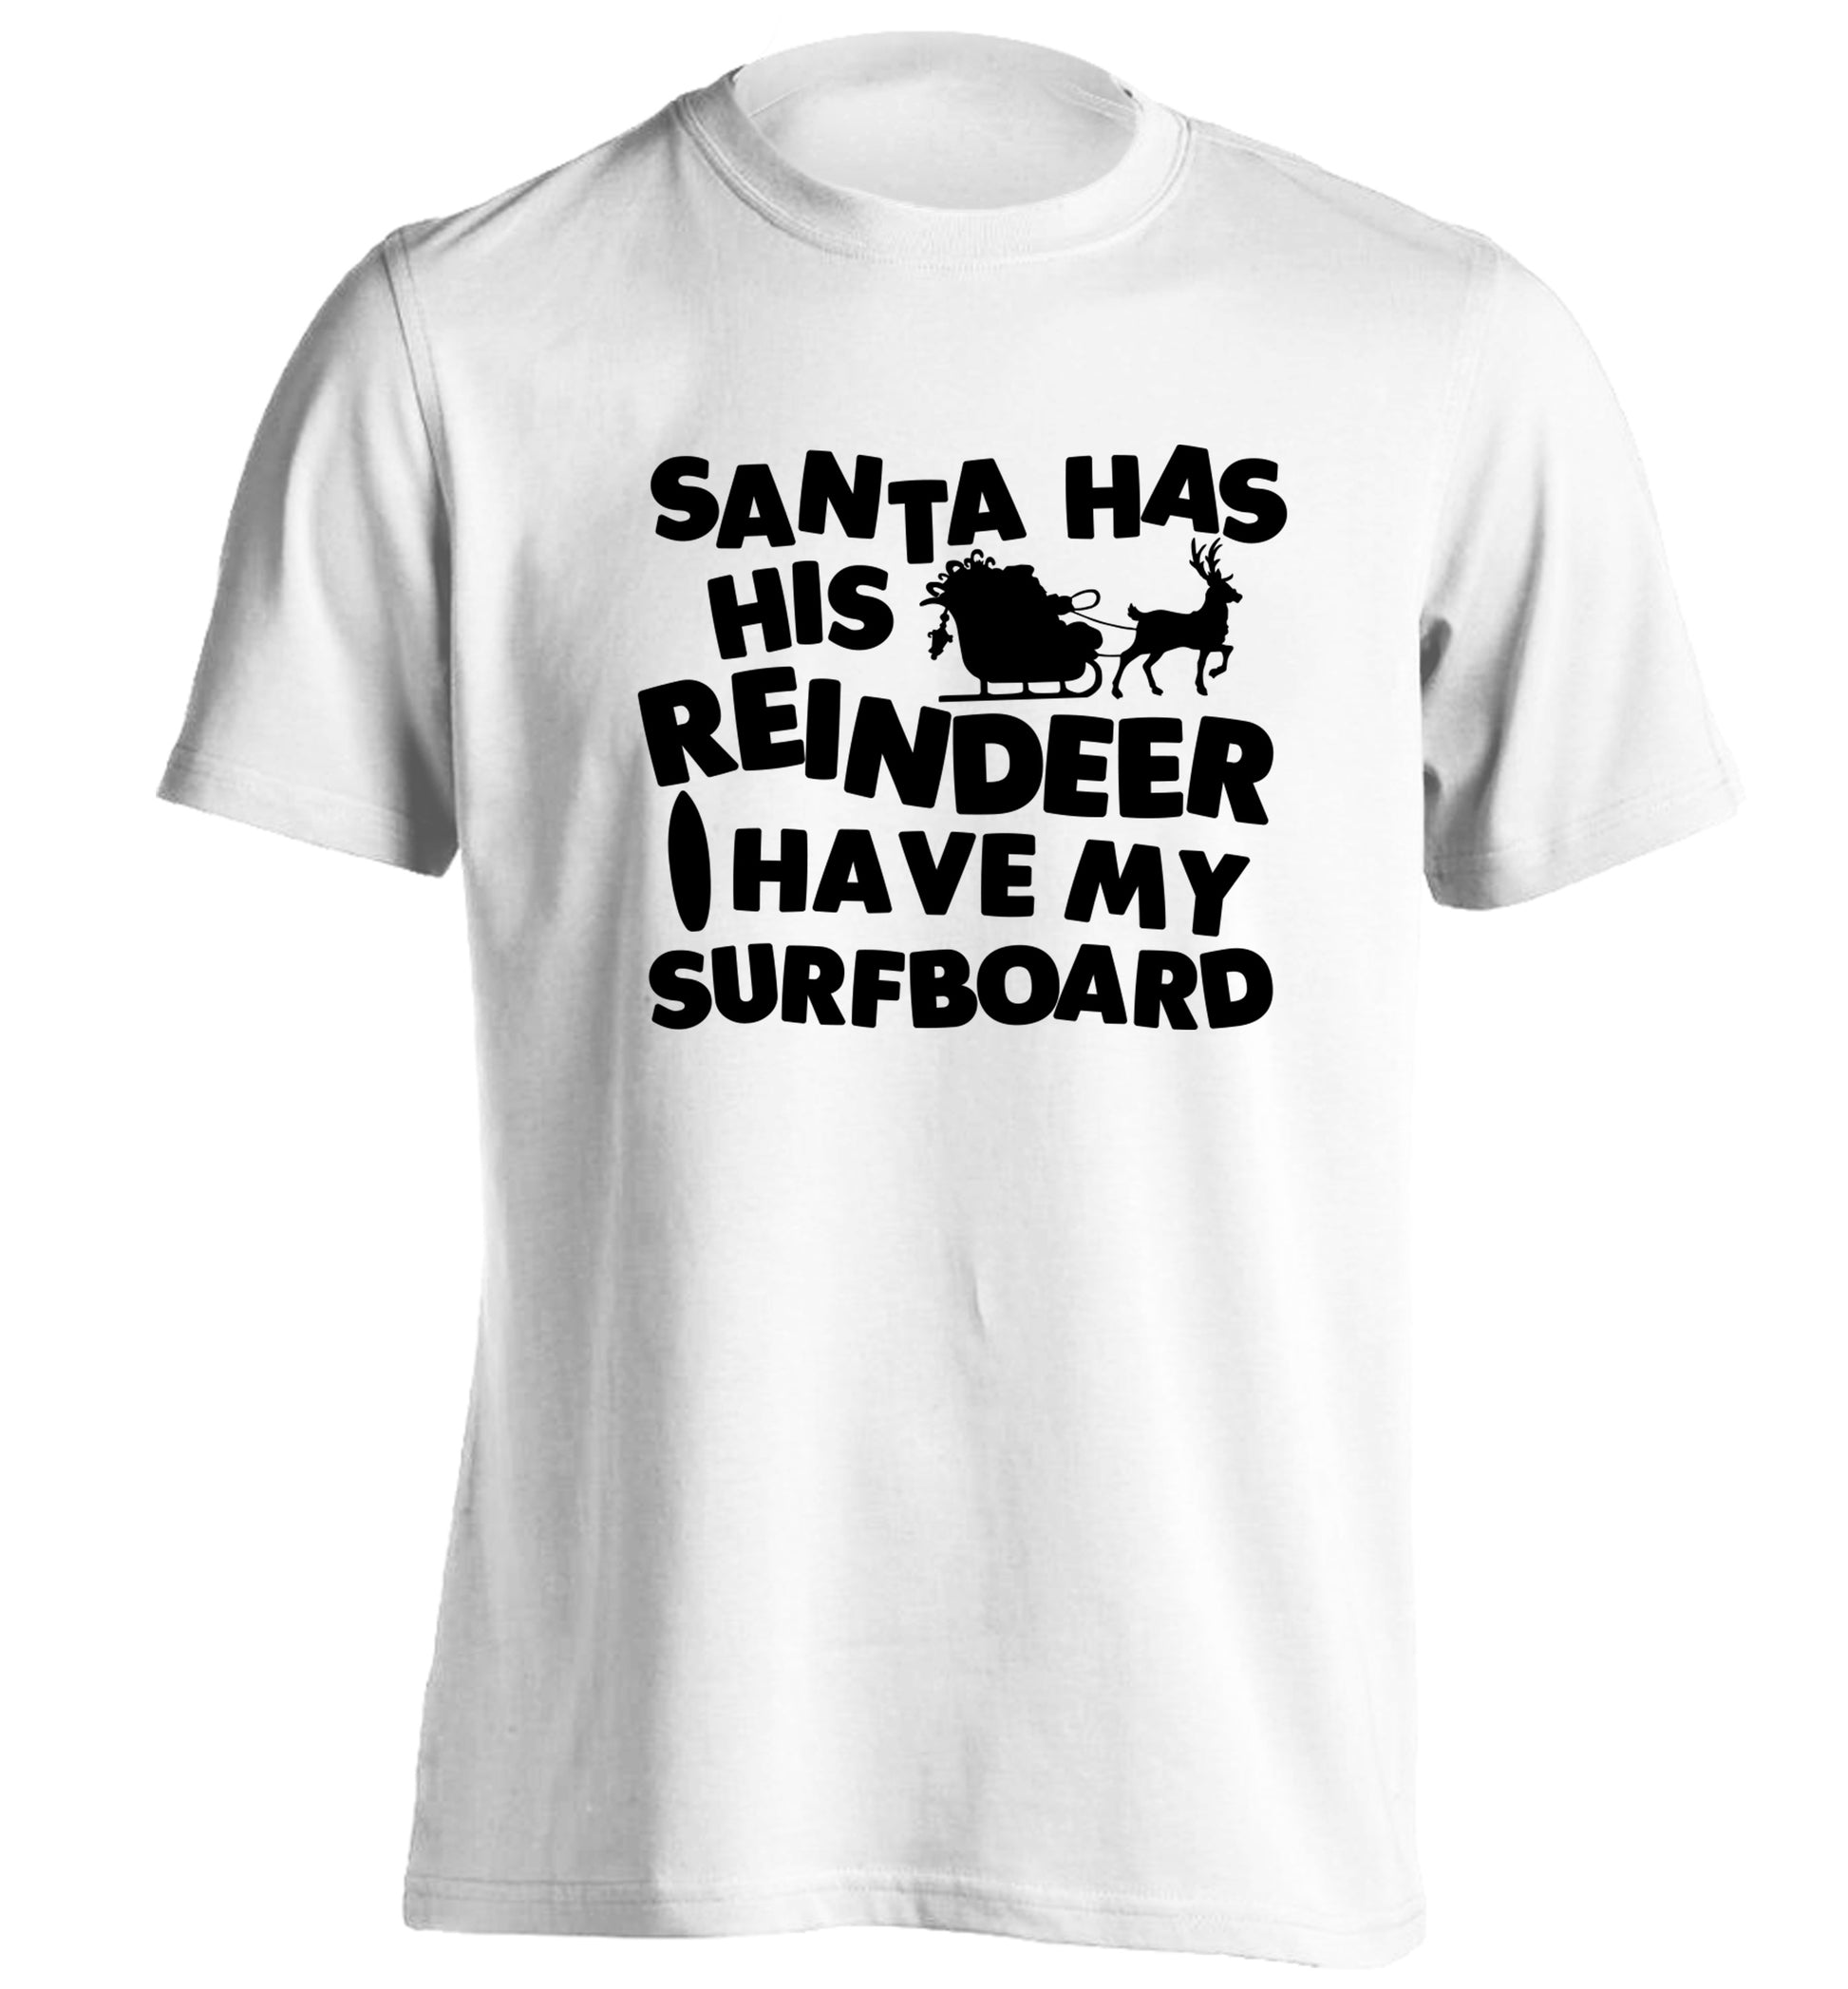 Santa has his reindeer I have my surfboard adults unisex white Tshirt 2XL